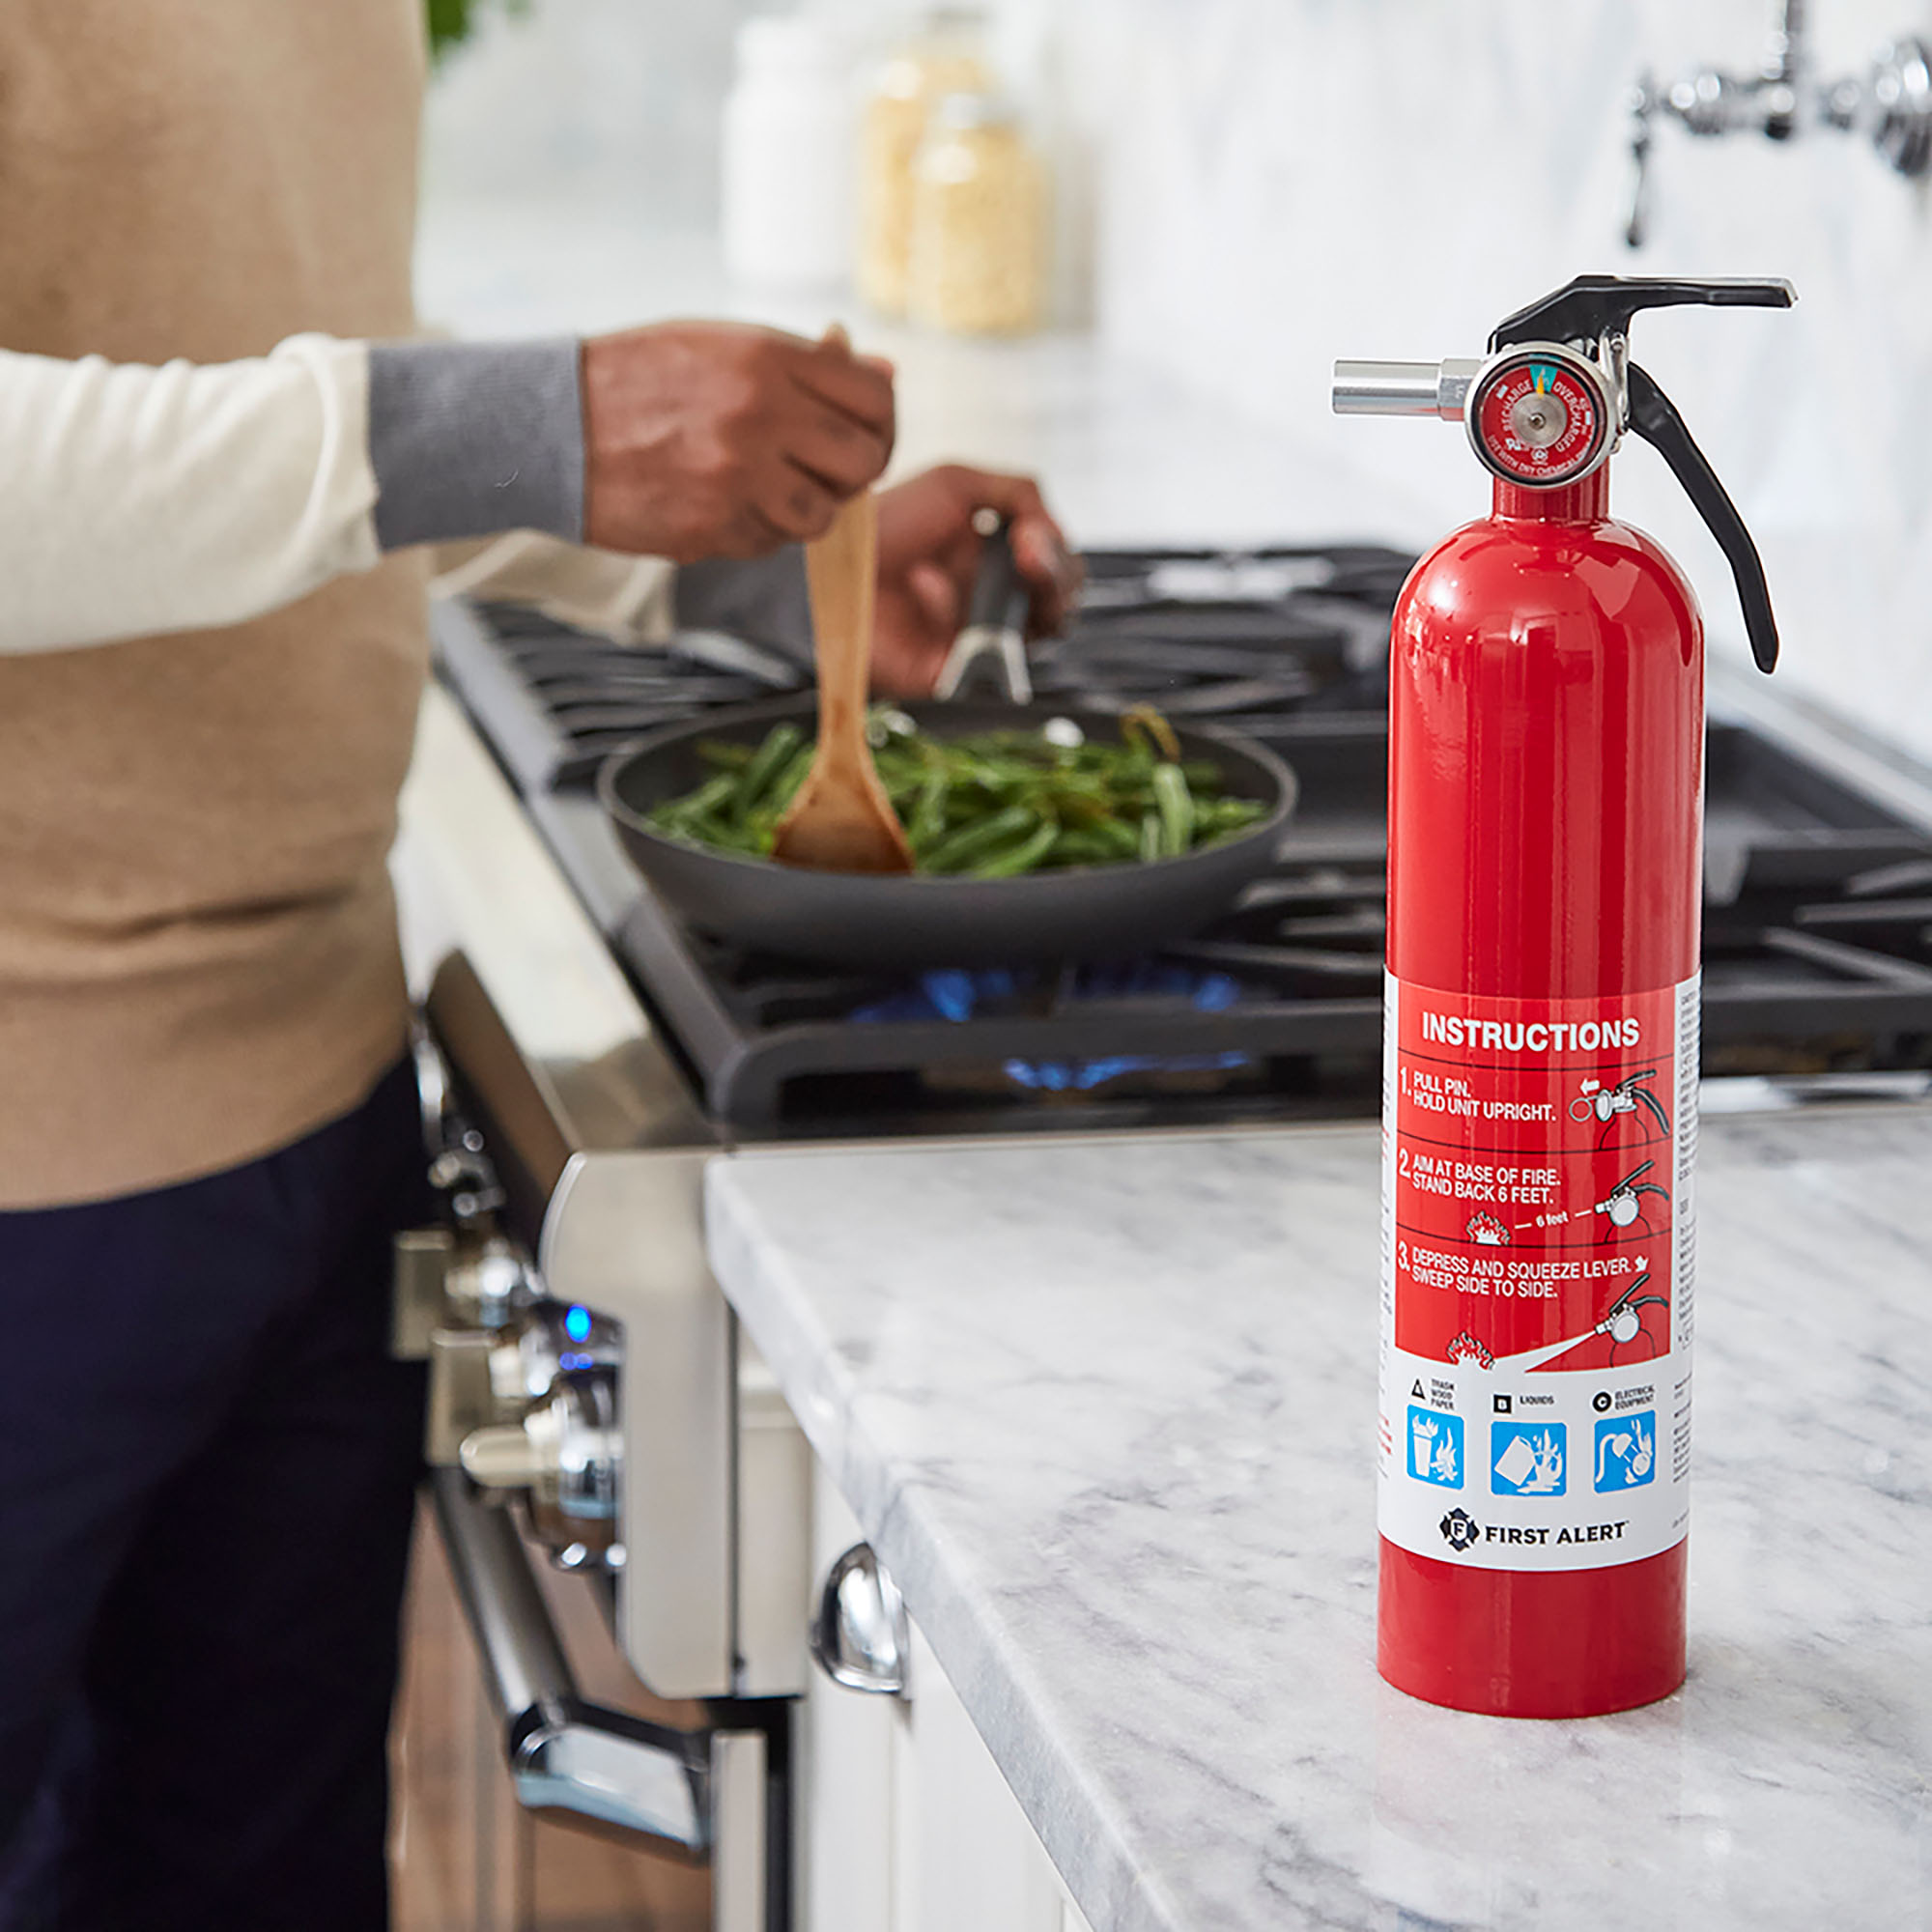 What is an ABC-rated fire extinguisher, where can I get one, and where should I place it?